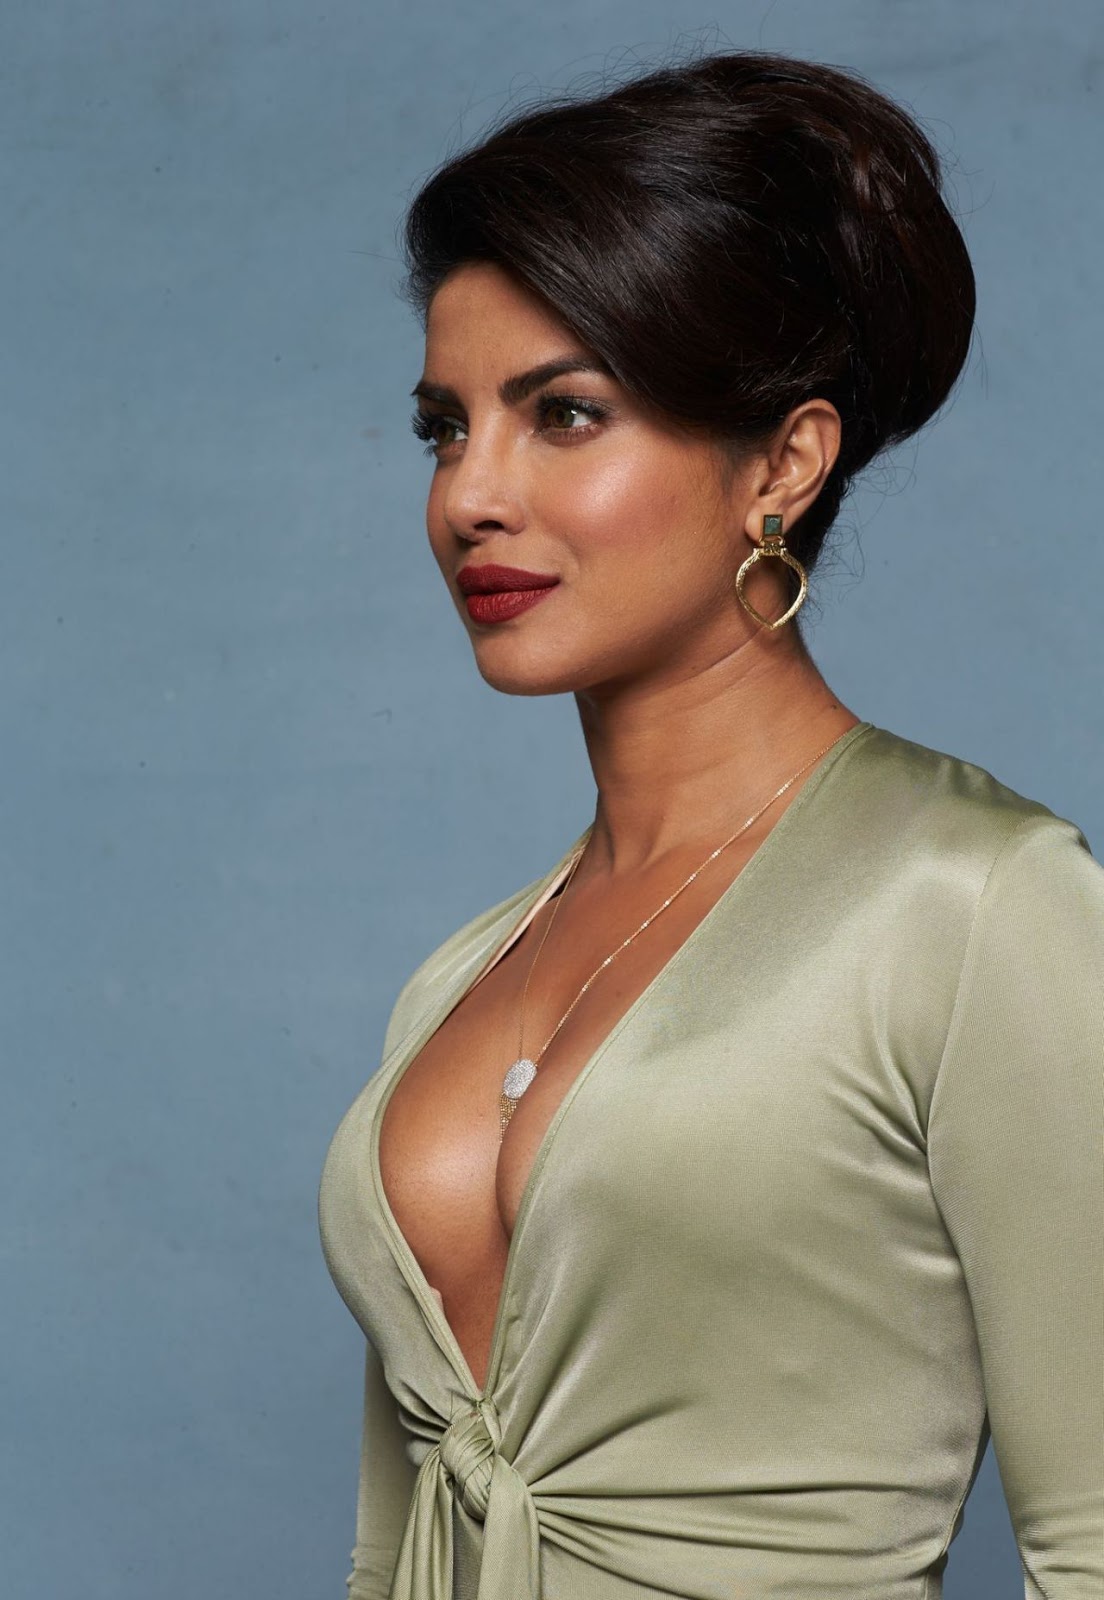 Priyanka Chopra hairstyles to inspire your next hair appointment